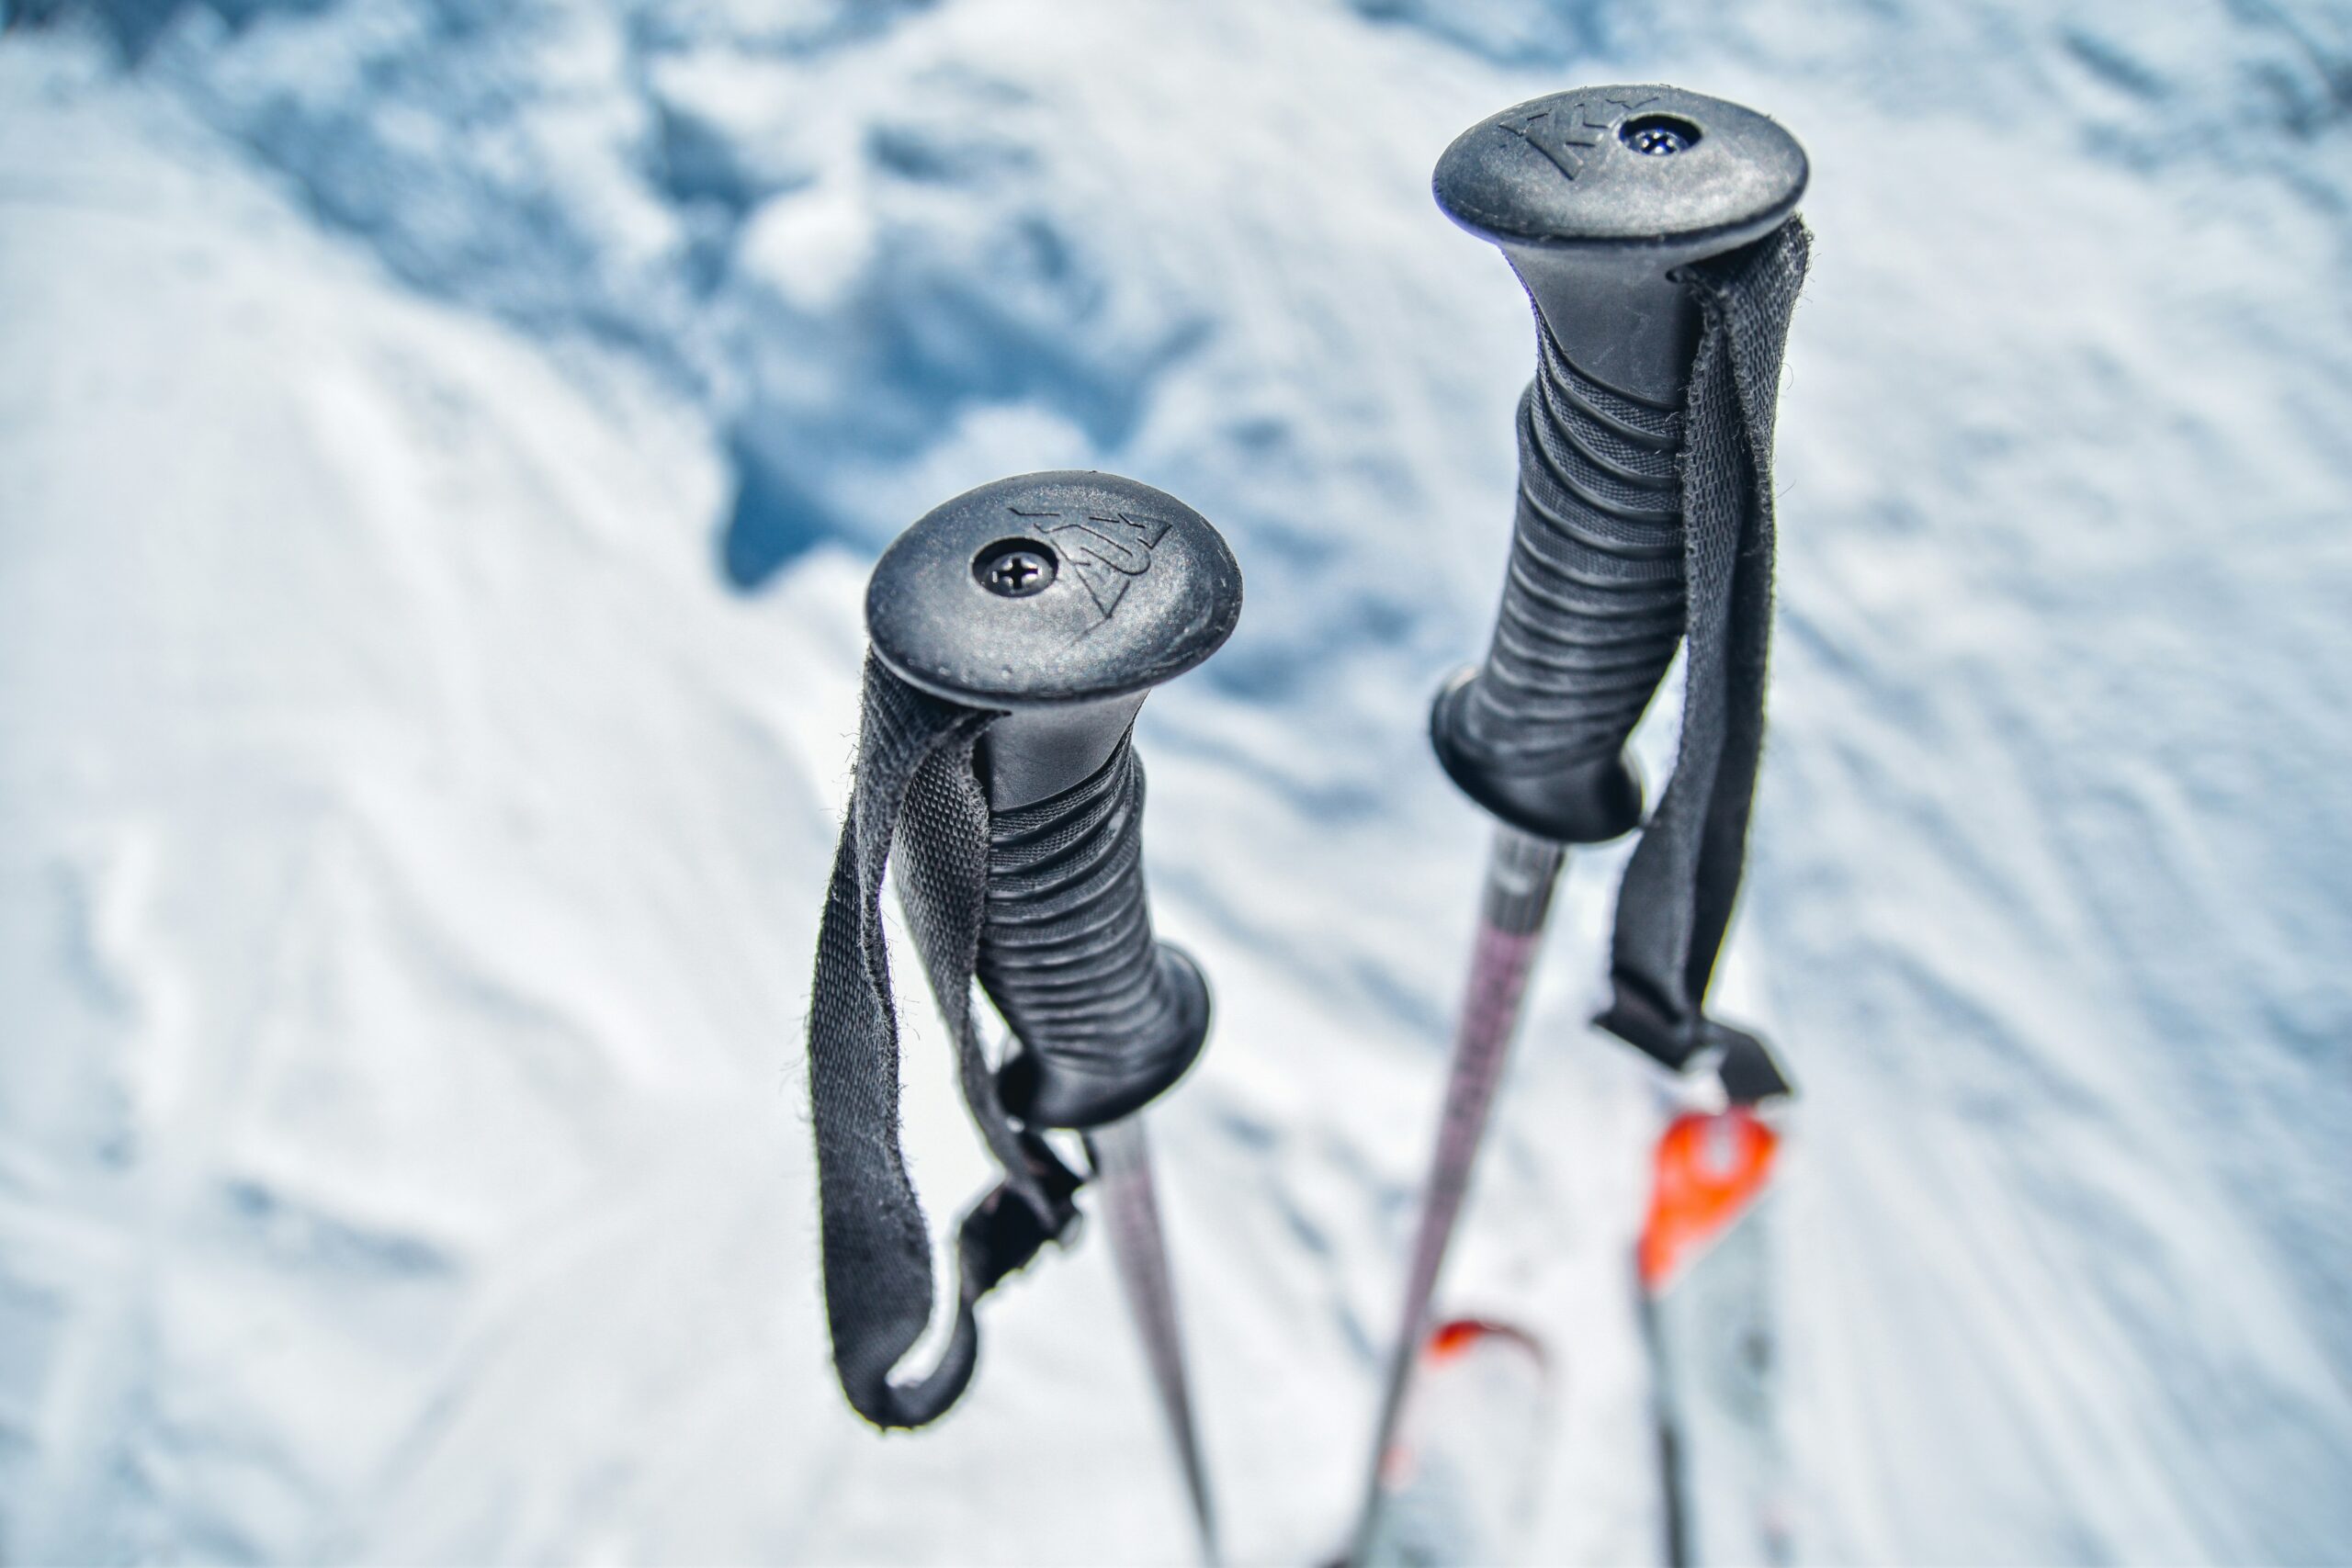 A close-up of ski poles in the snow. Photo by Urban Sanden on Unsplash